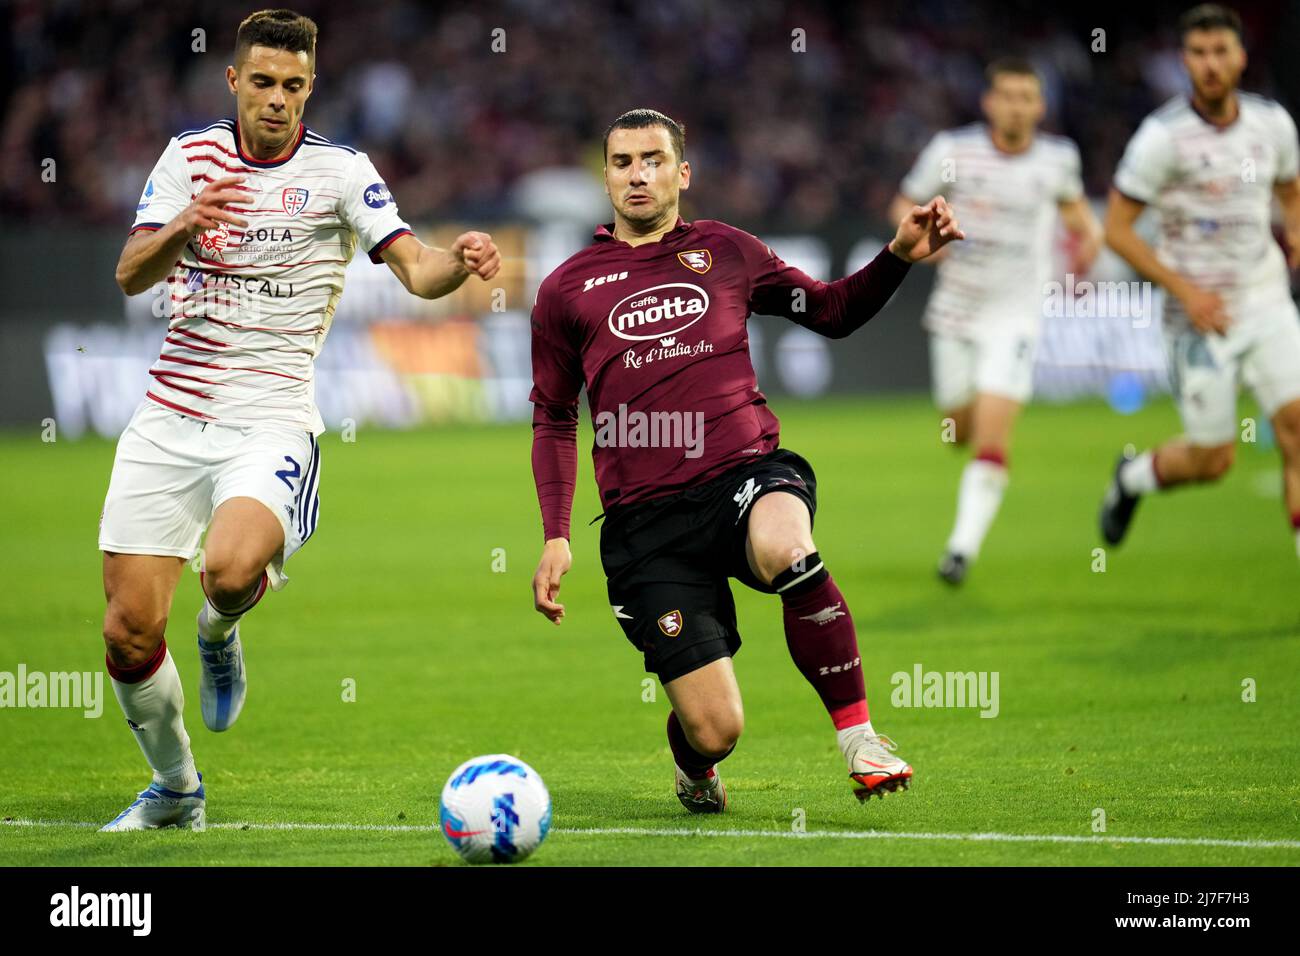 SALERNO, ITALY - MAY 08: Alberto Grassi of Cagliari Calcio competes for the ball with Federico Bonazzoli of US Salernitana ,during the Serie A match between US Salernitana and Cagliari Calcio at Stadio Arechi on May 8, 2022 in Salerno, Italy. (Photo by MB Media ) Stock Photo